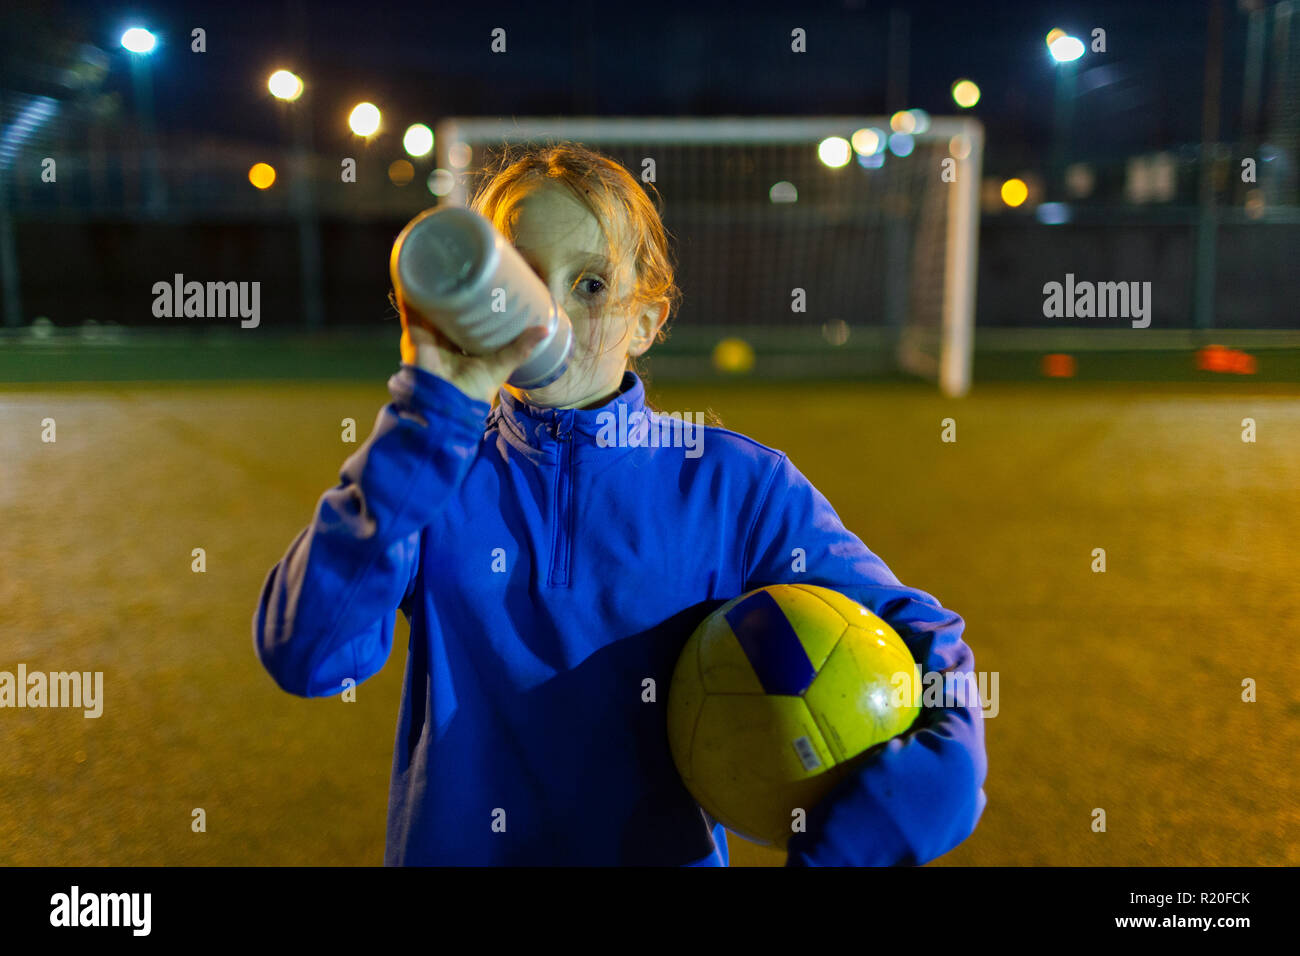 Girl soccer player taking a break, drinking water on field at night Stock Photo